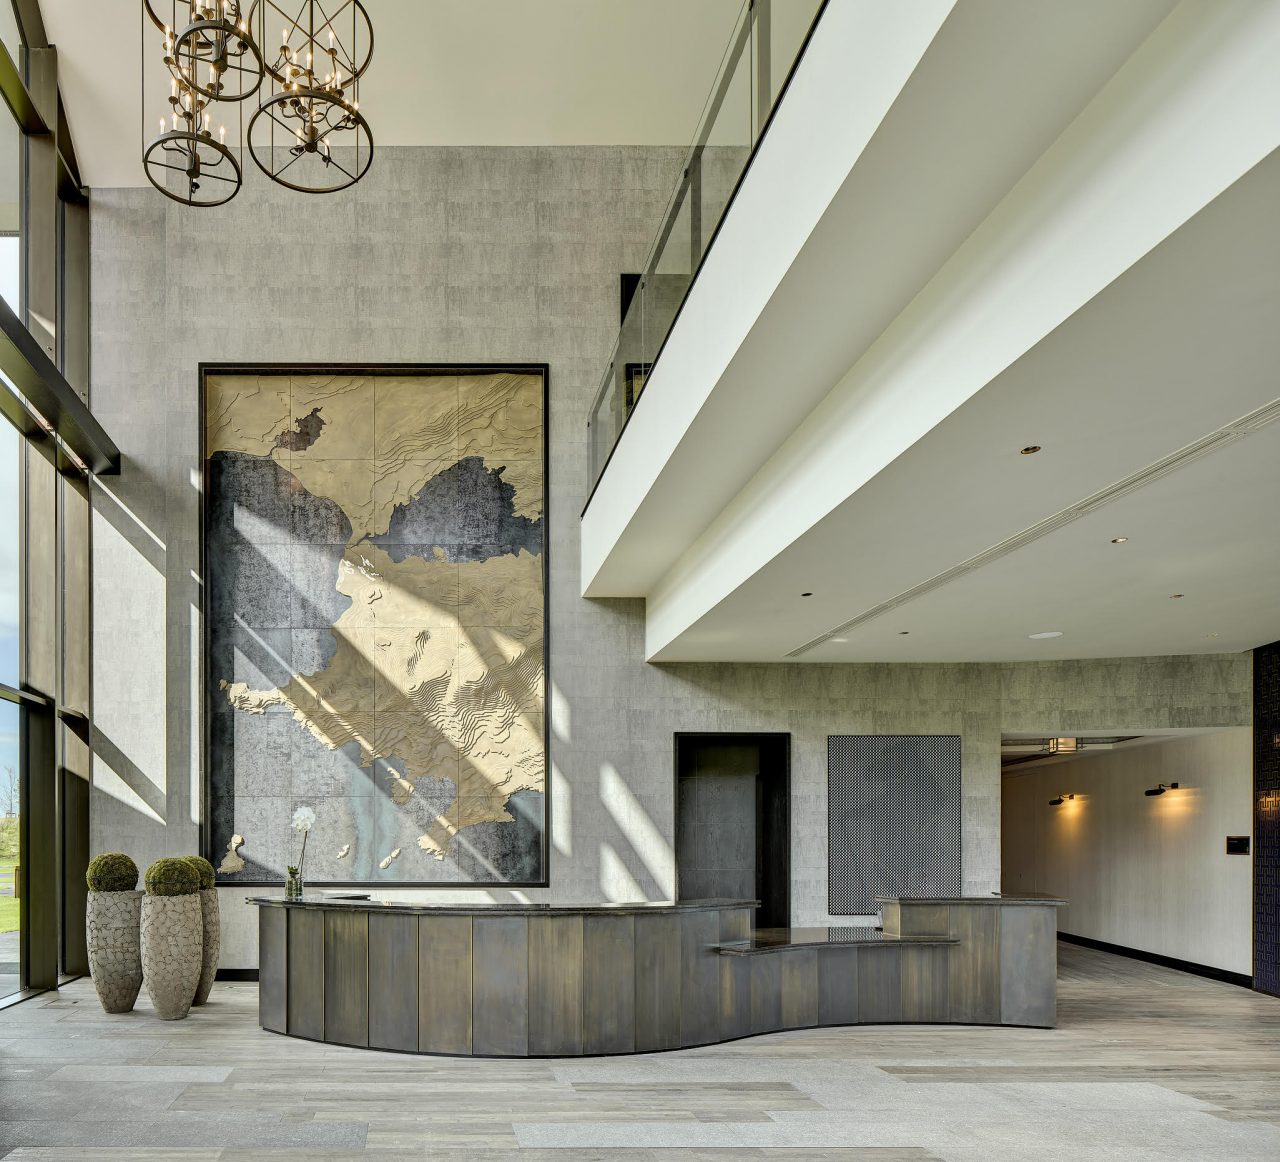 award winning image of the reception area of a luxury hotel